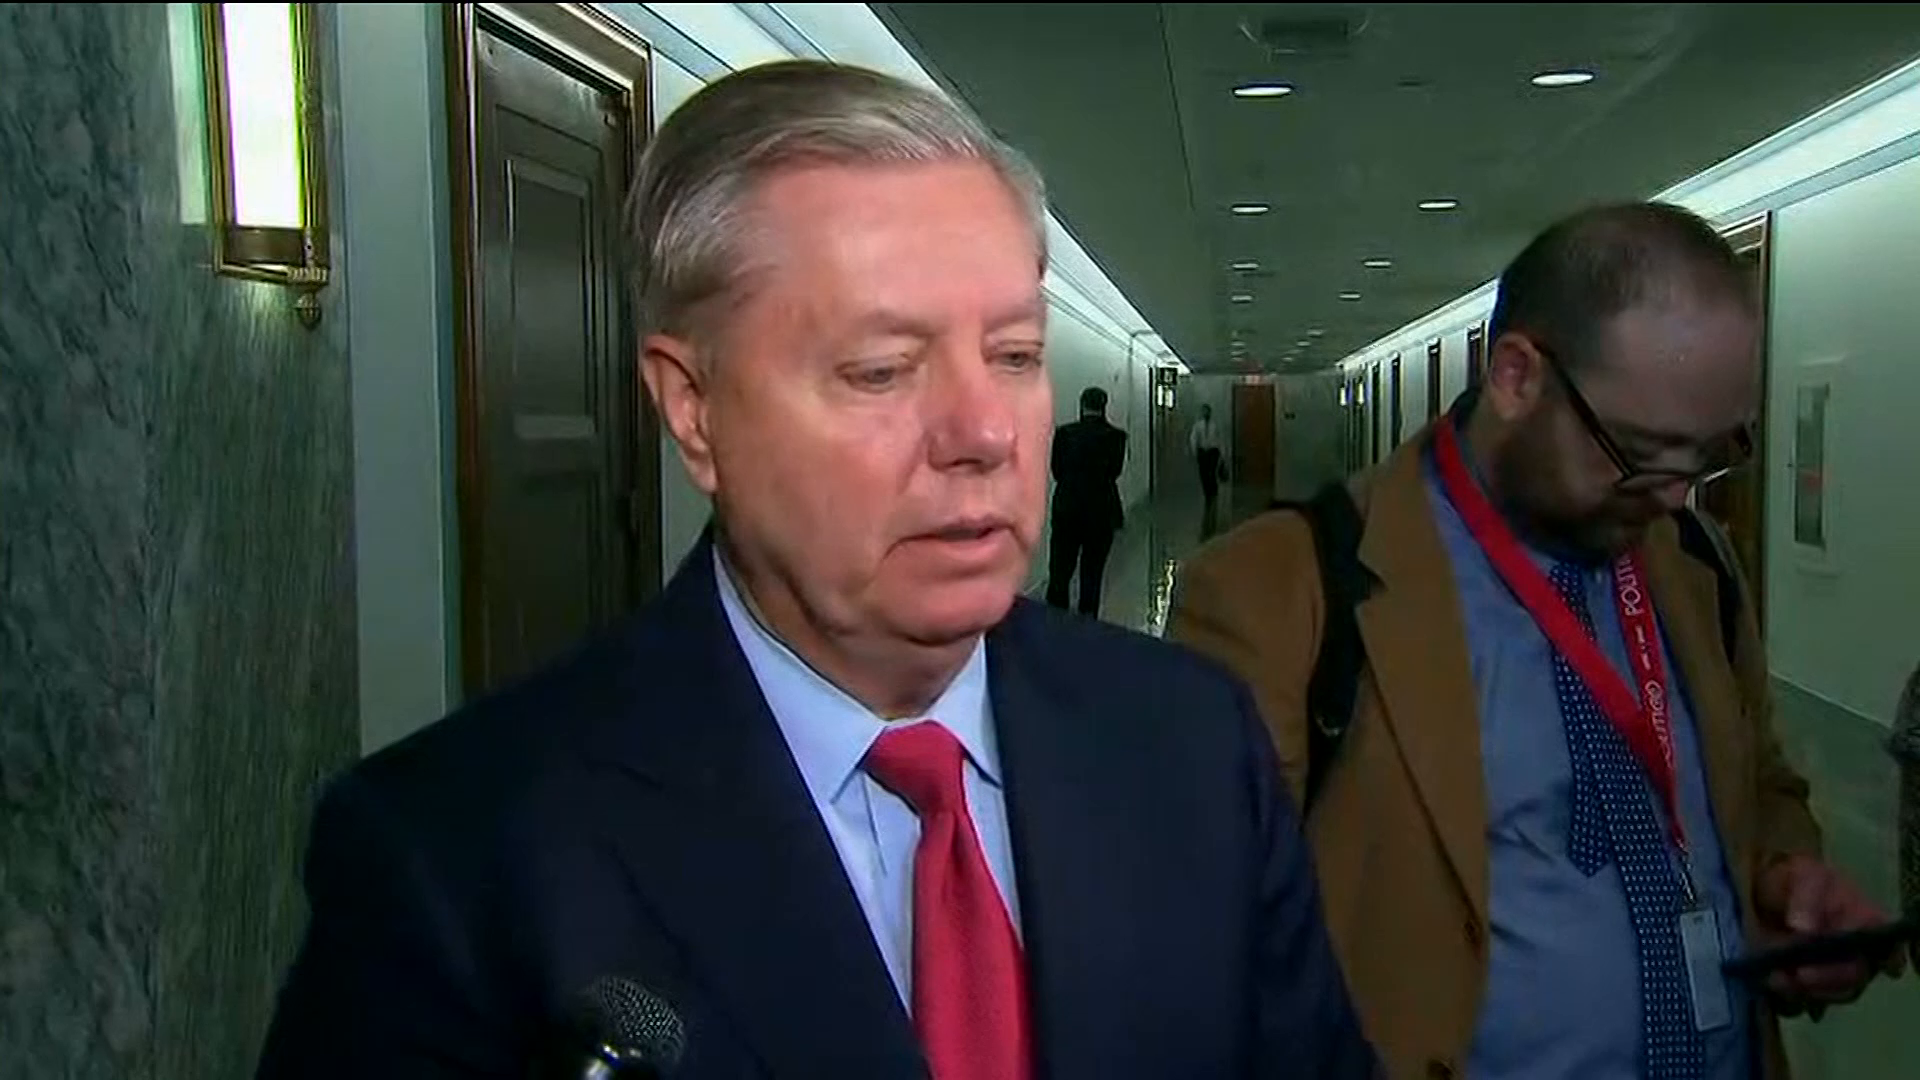 Lindsey Graham had strong words in his defense of AG Jeff Sessions